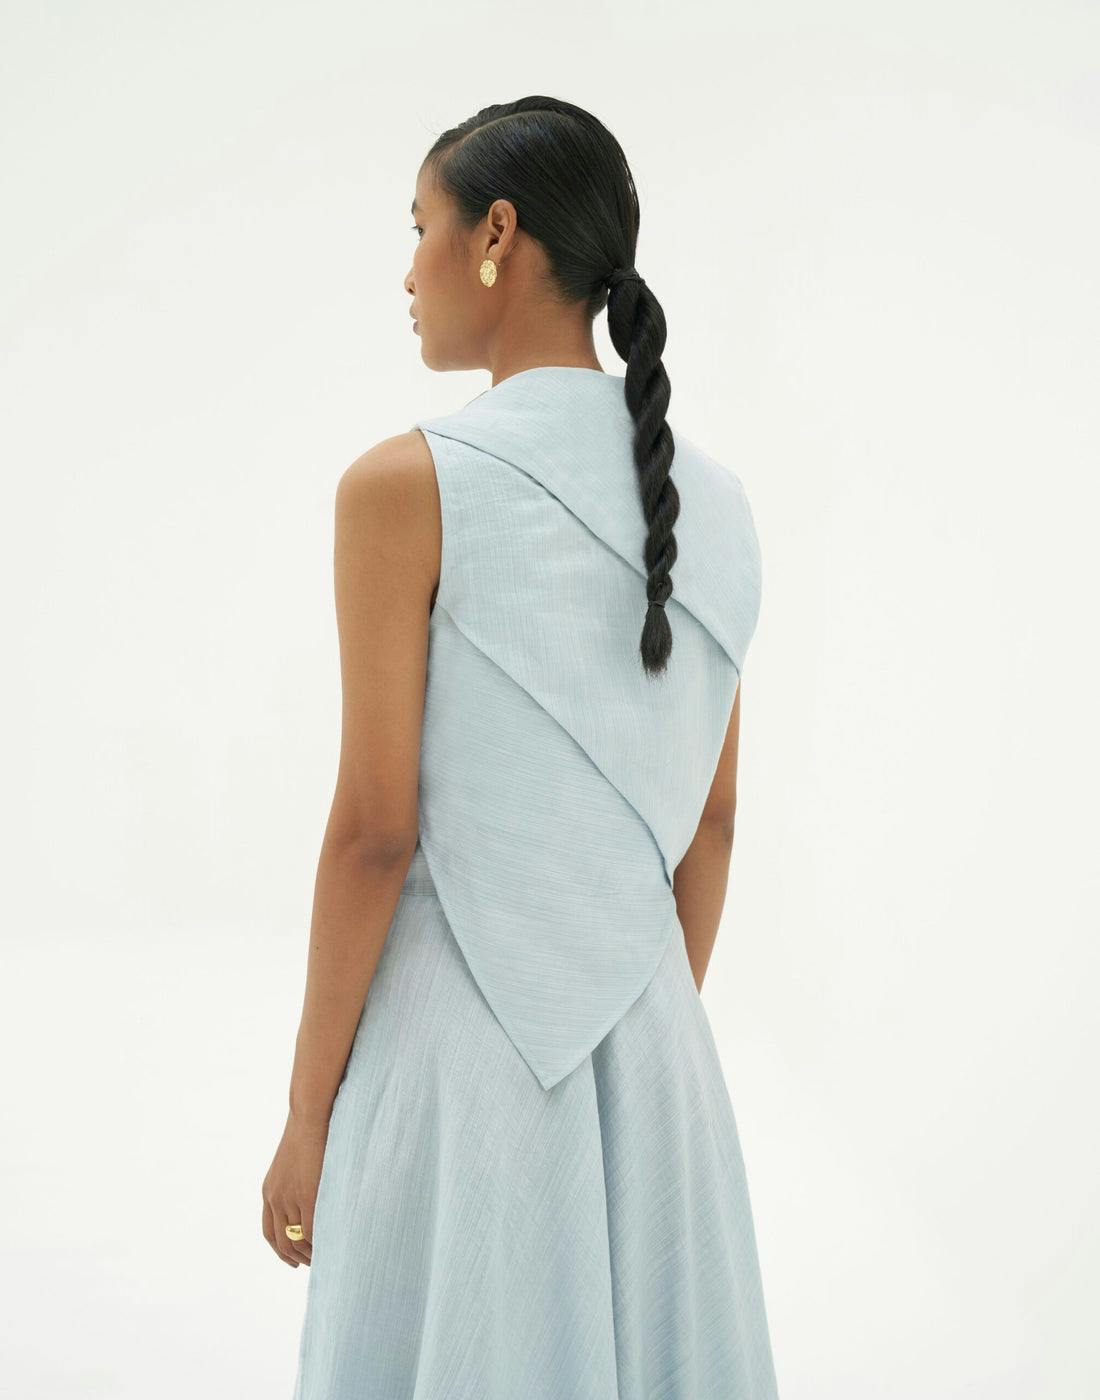 Diagonal Pleated Top, a product by Corpora Studio